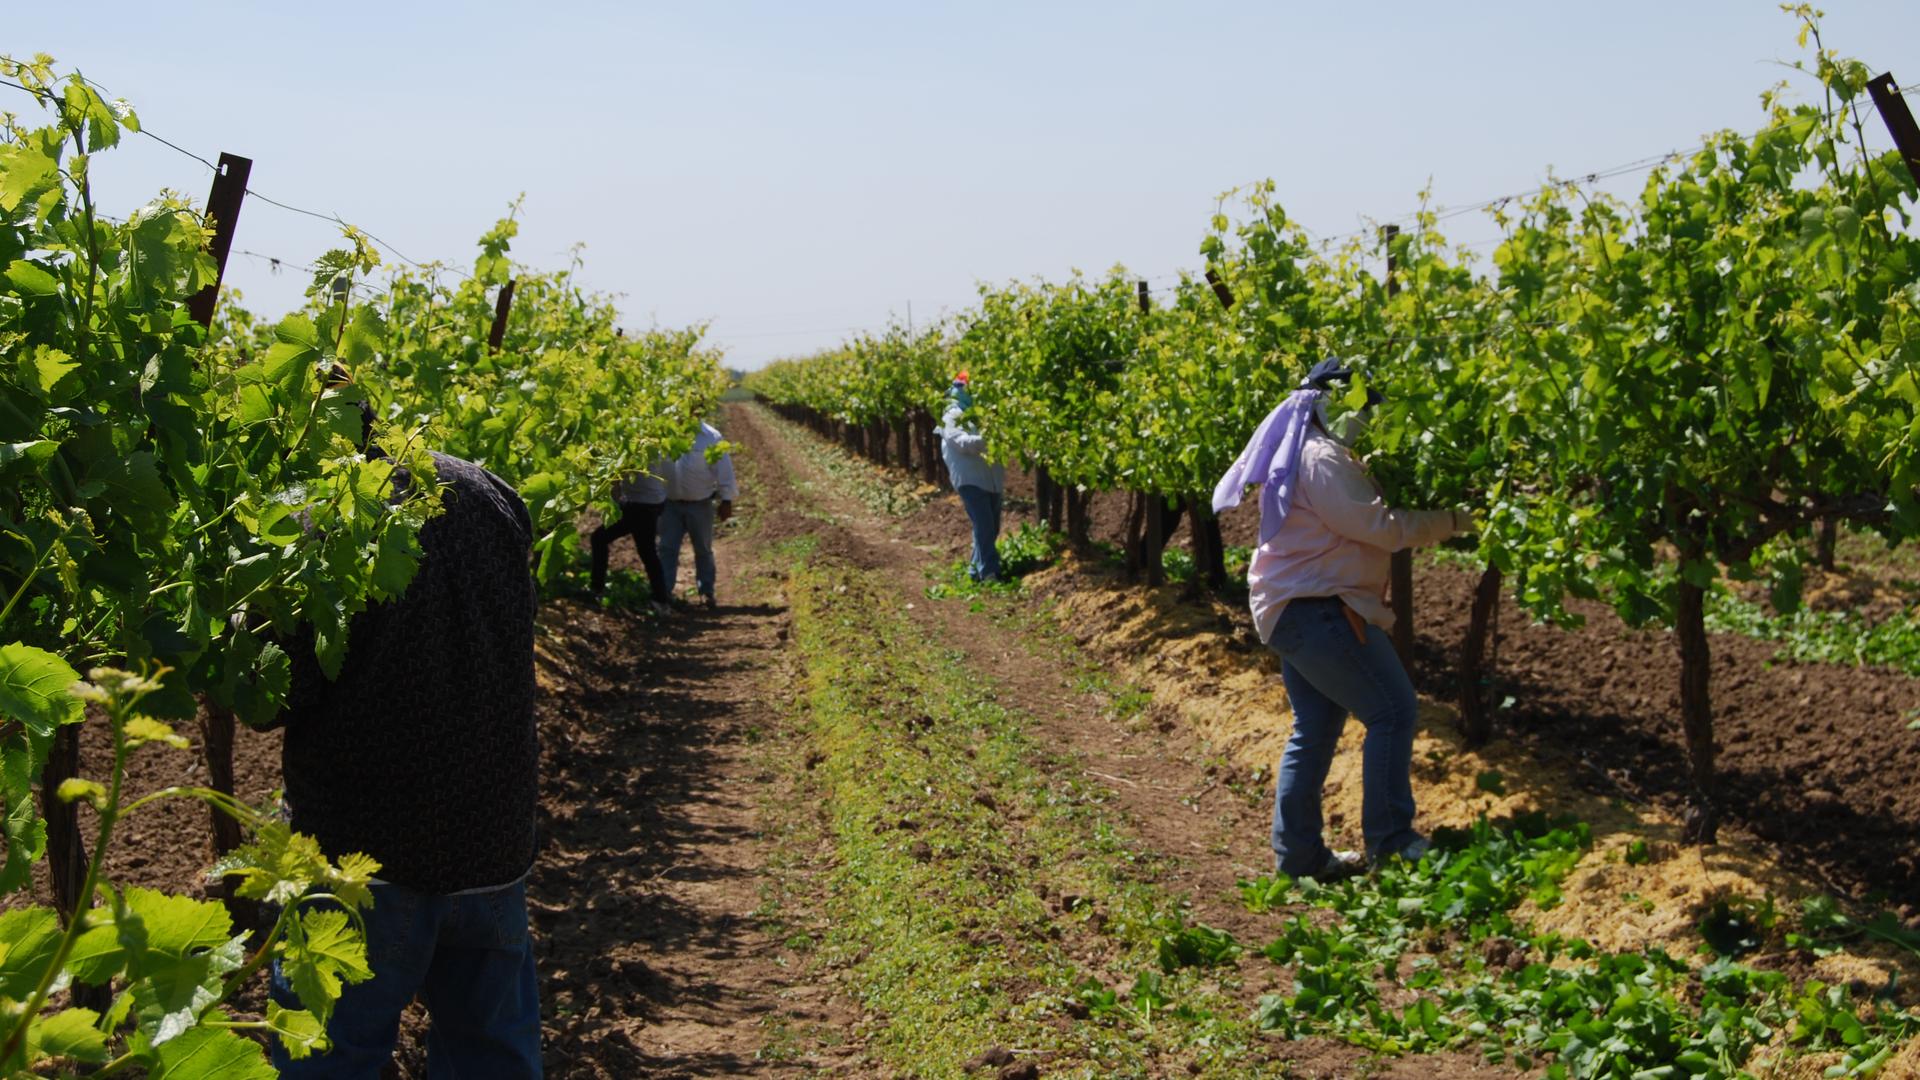 Farm workers in California's Central Valley.